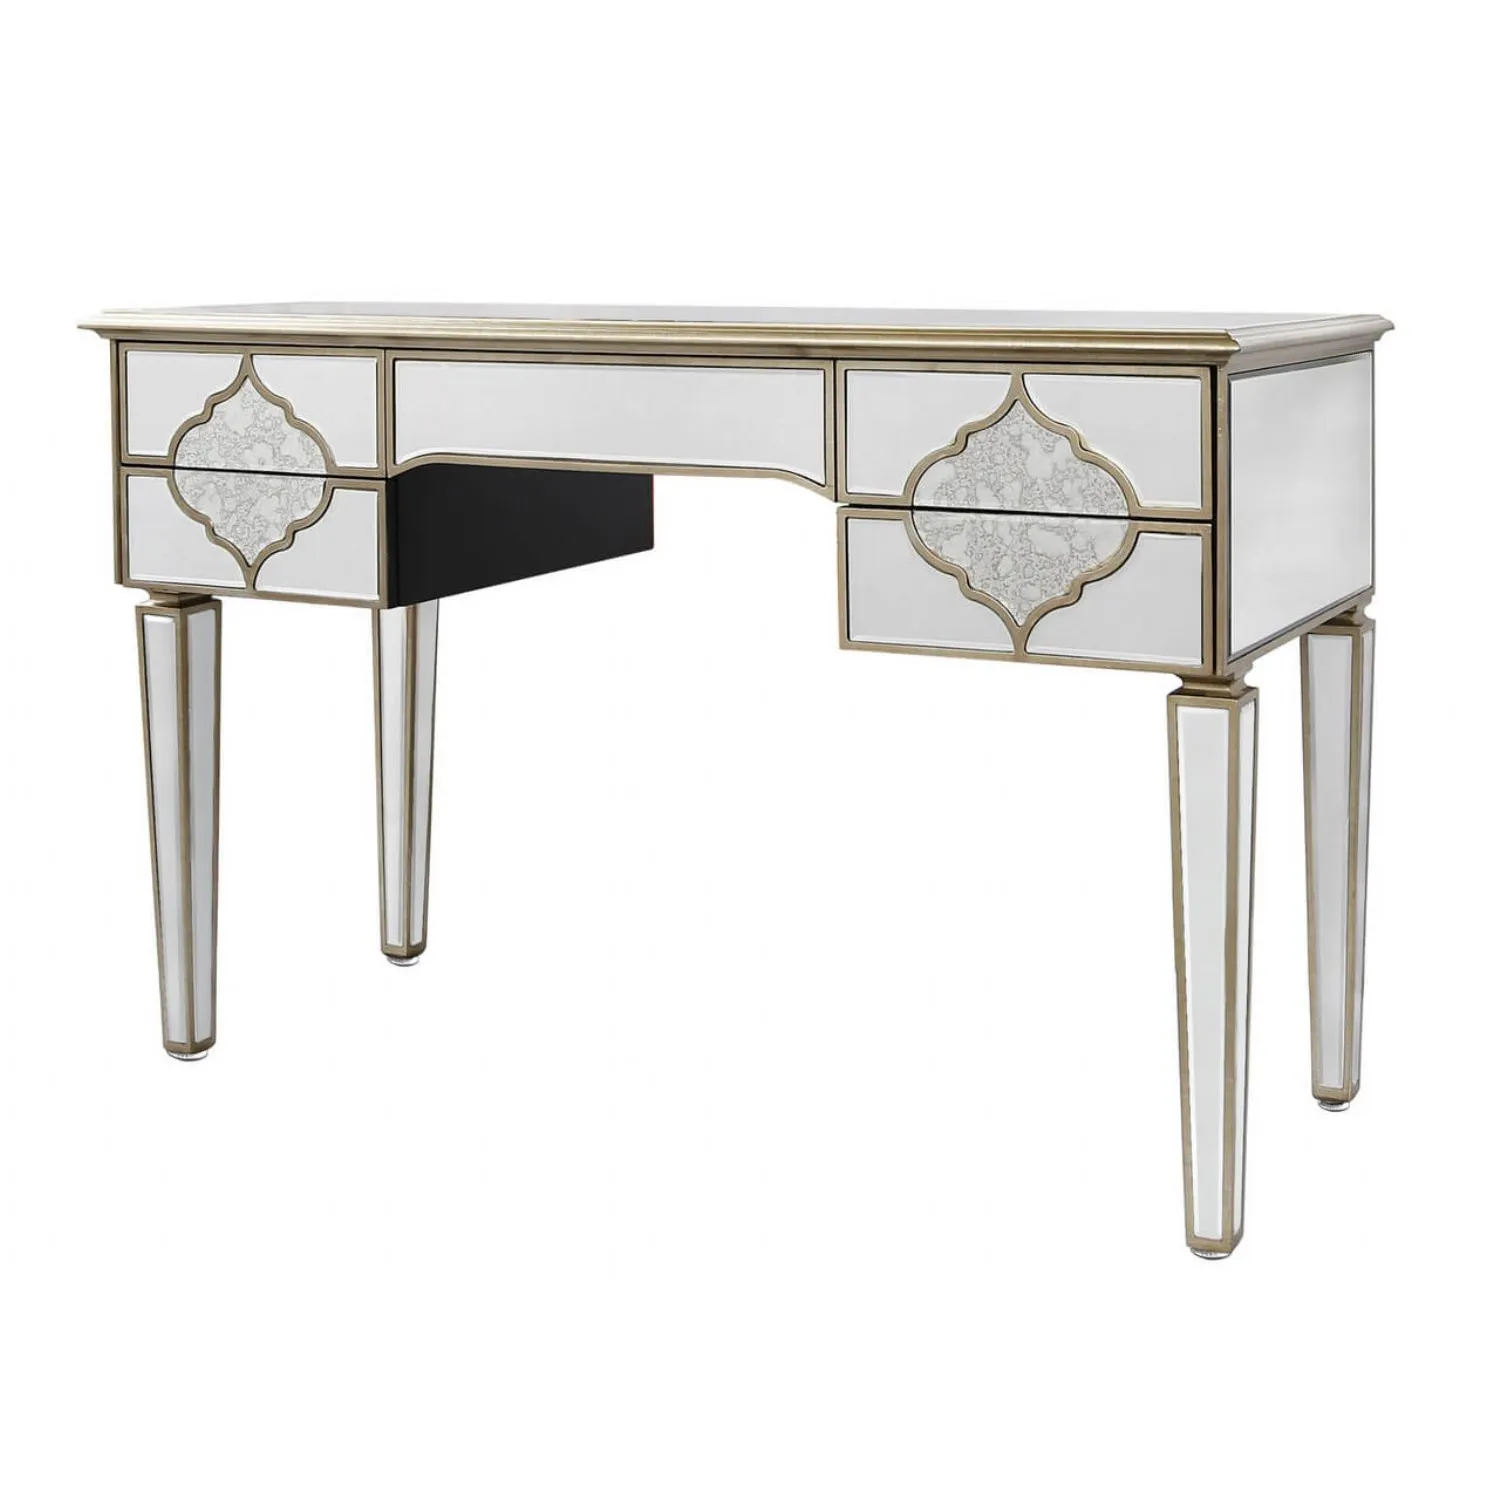 Morocco 5 Drawer Mirror Dressing Table